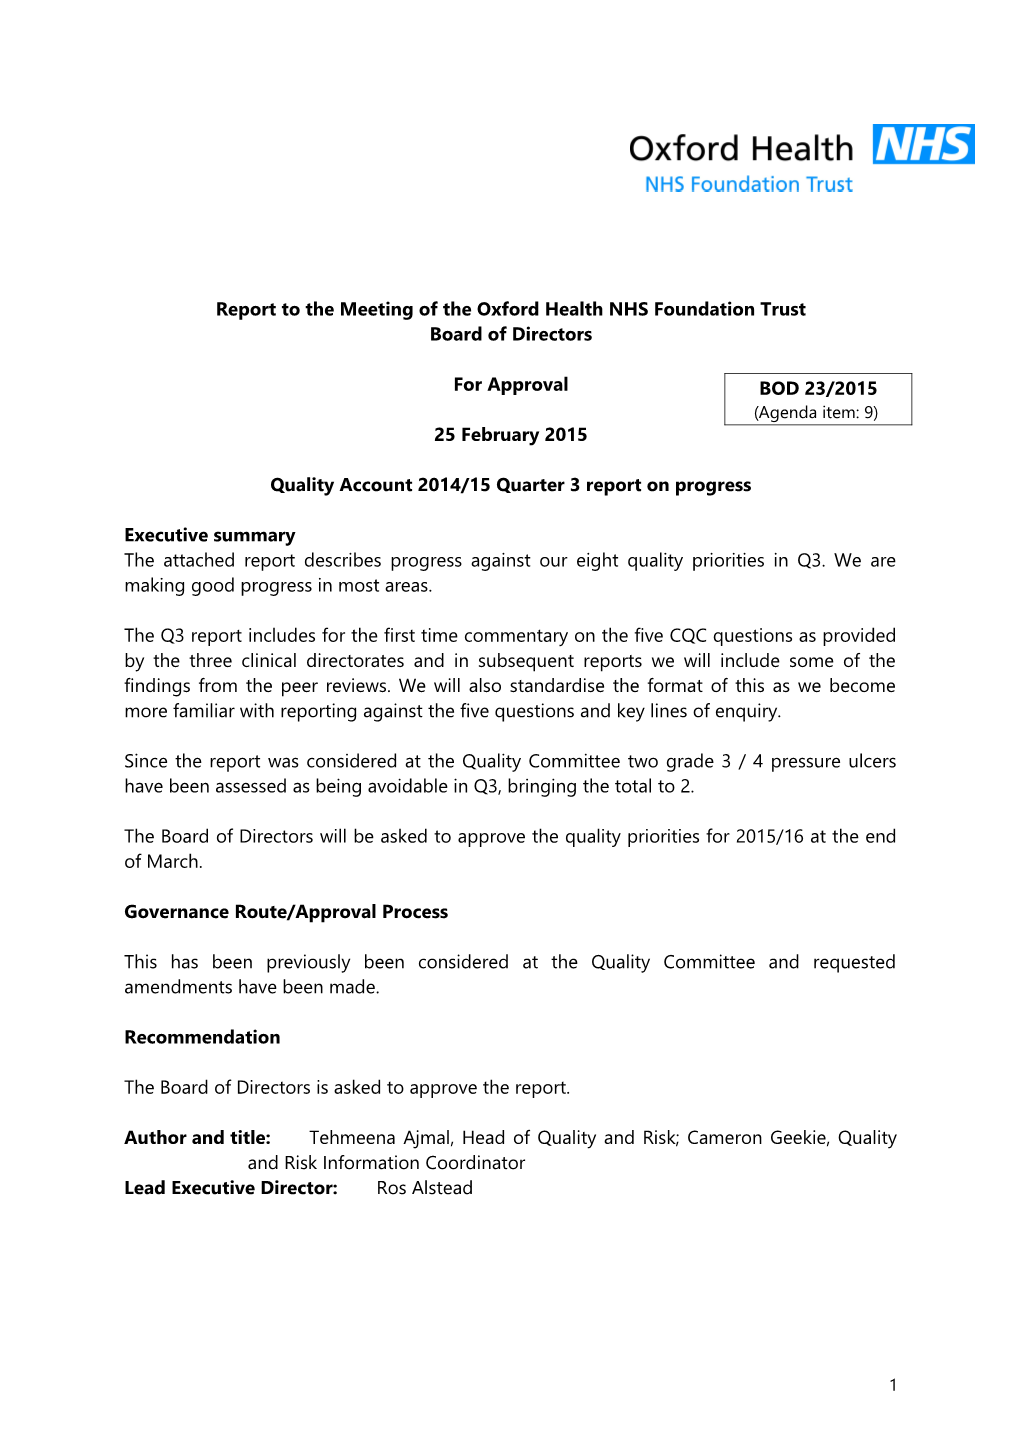 Report to the Meeting of the Oxford Health NHS Foundation Trust